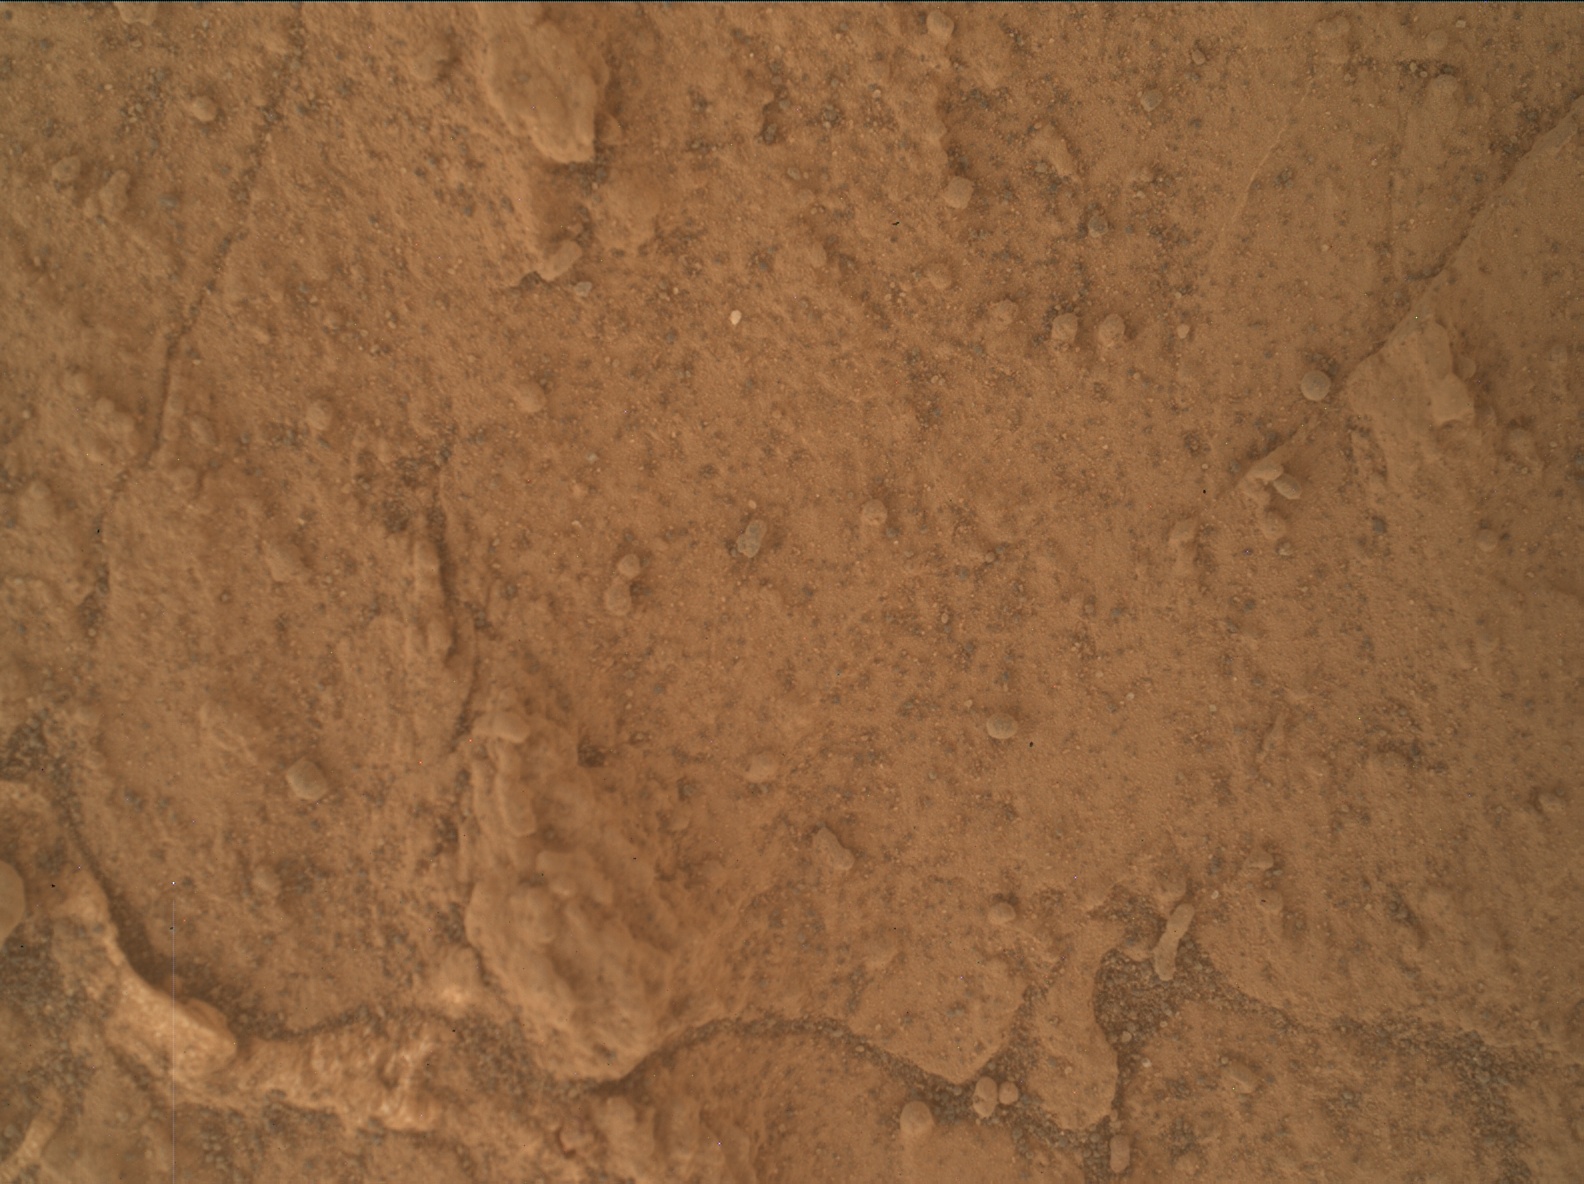 Nasa's Mars rover Curiosity acquired this image using its Mars Hand Lens Imager (MAHLI) on Sol 3190